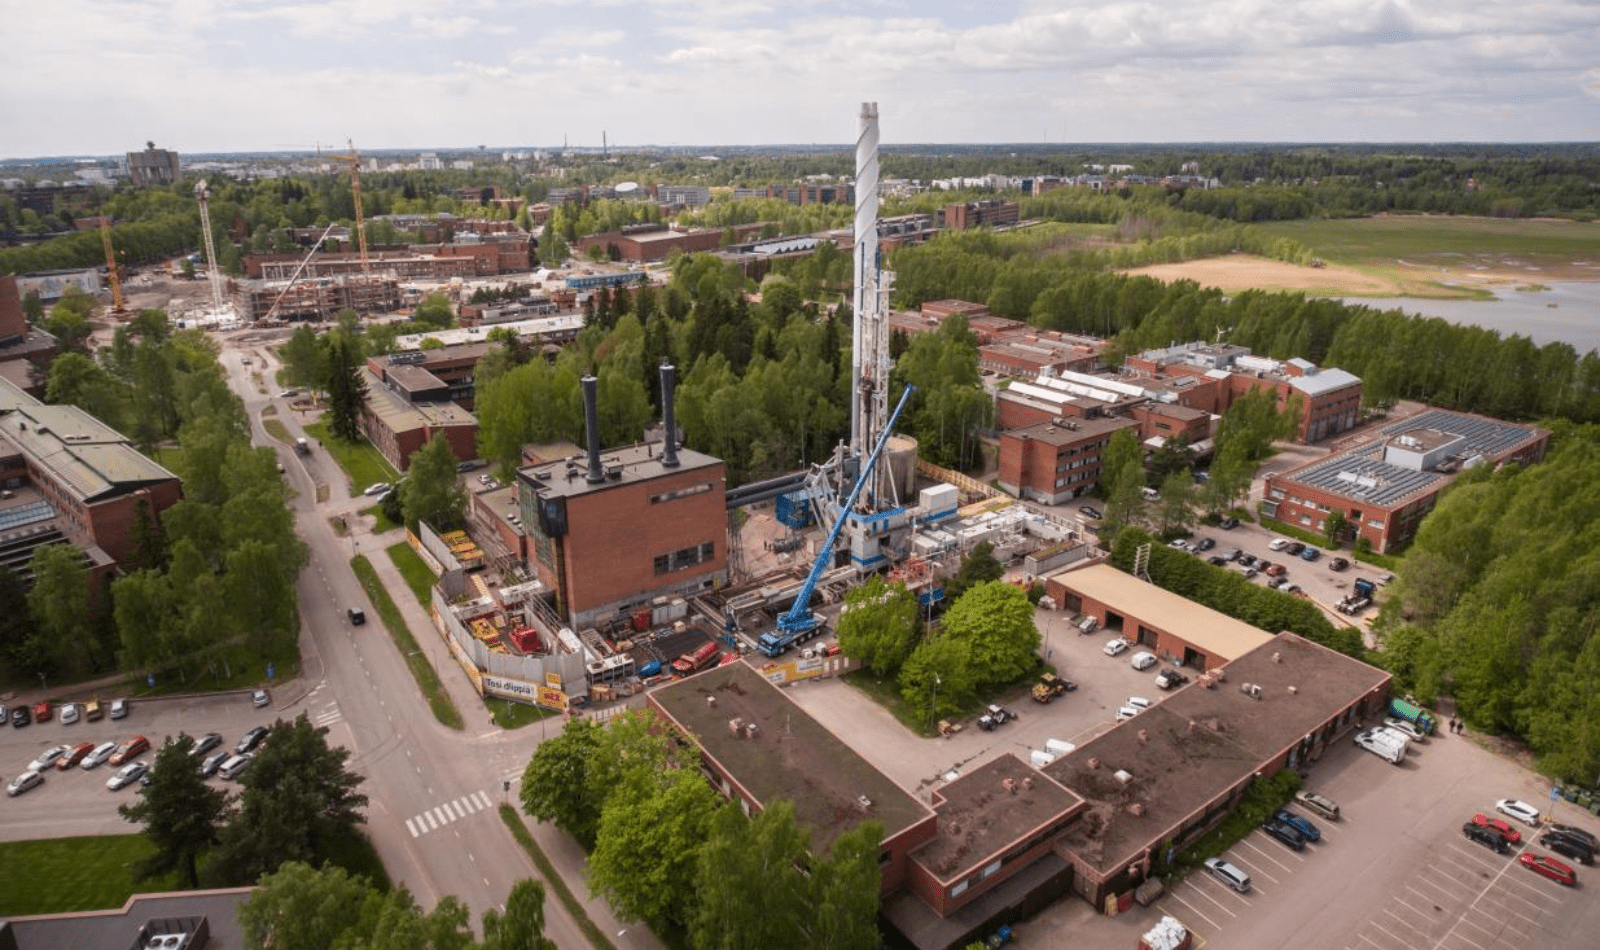 Aerial view of the project site in Otaniemi, Espoo. (Source: st1)